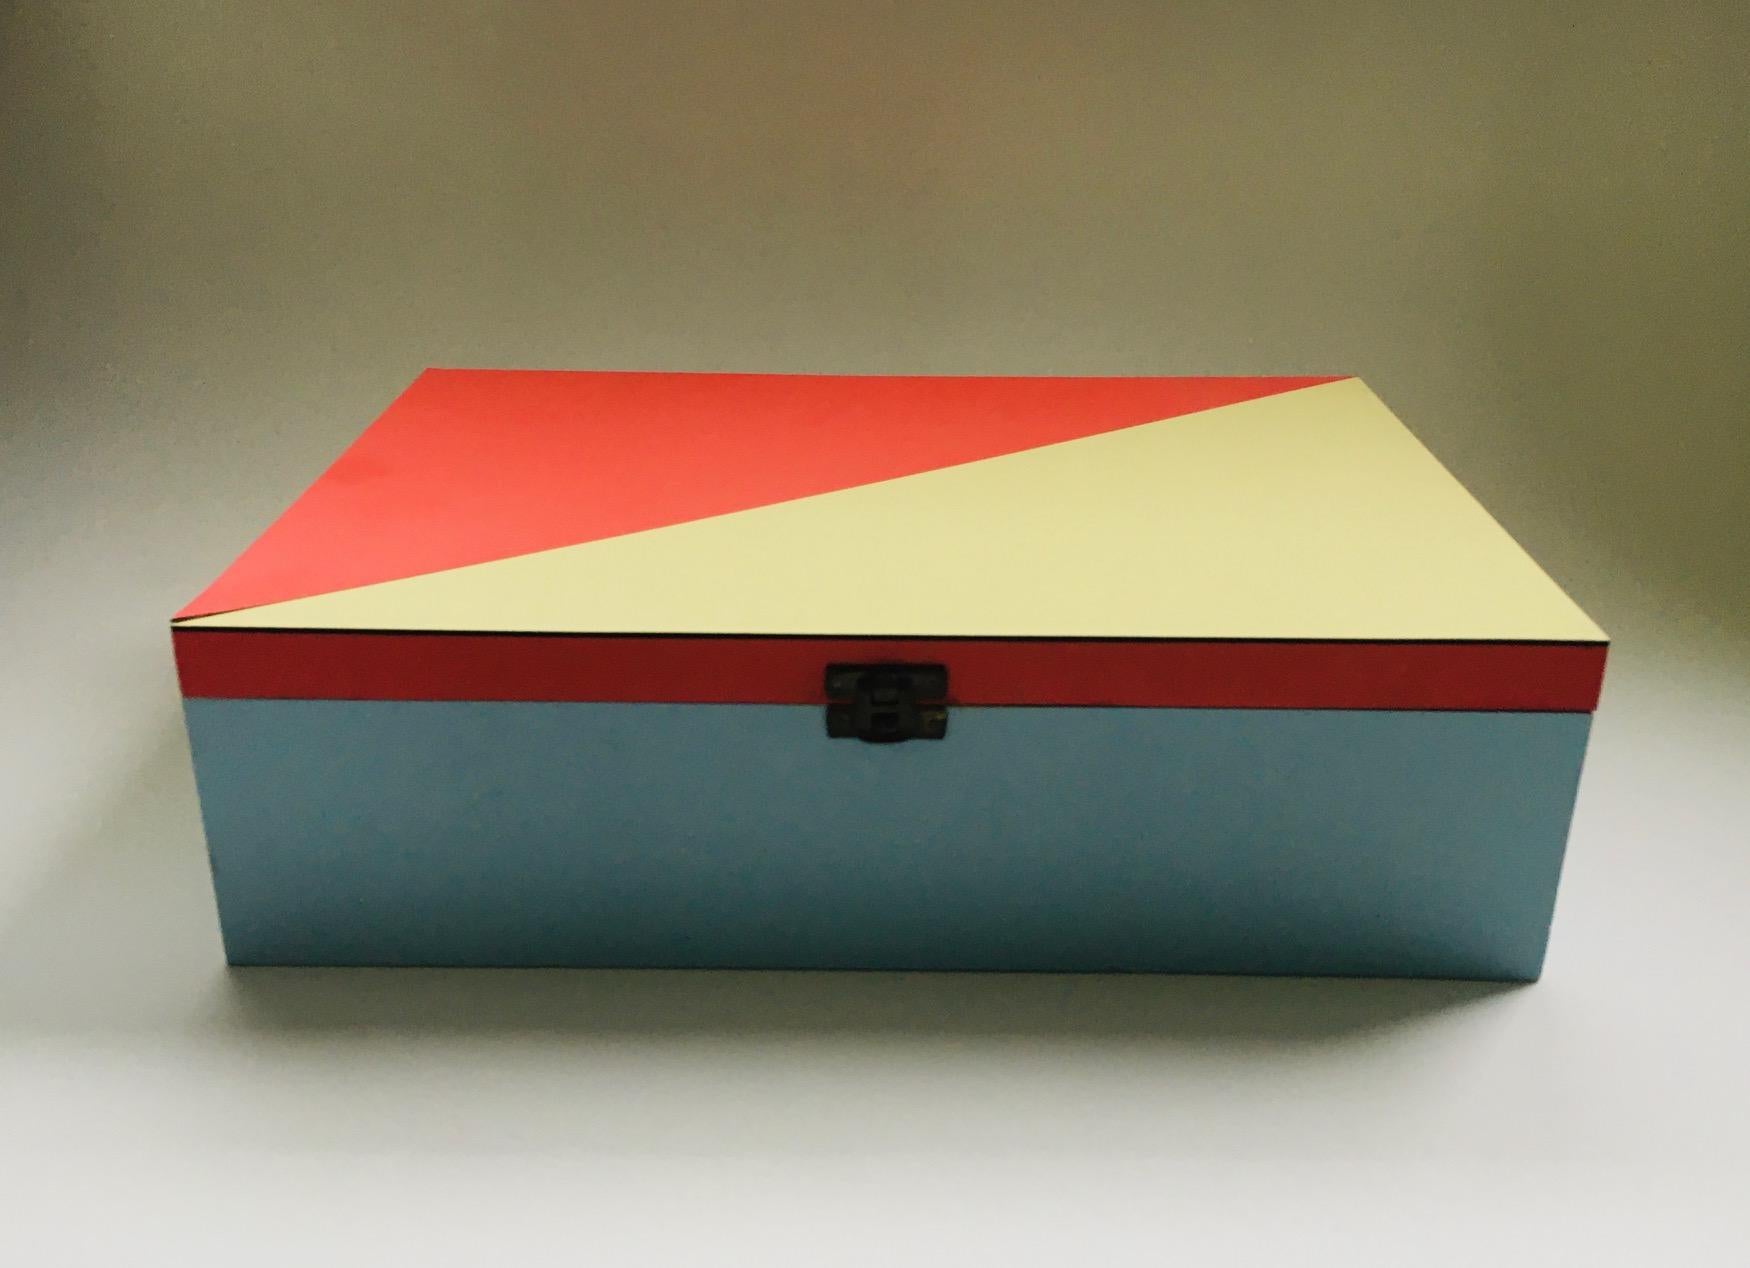 Vintage Midcentury Modern Dutch Design in the style of DE STIJL Modernism letter box. Made in Holland, the Netherlands in the 1950's. Wood constructed box, finished with pale blue, mild red and pale yellow laminate in geometric pattern. All wood